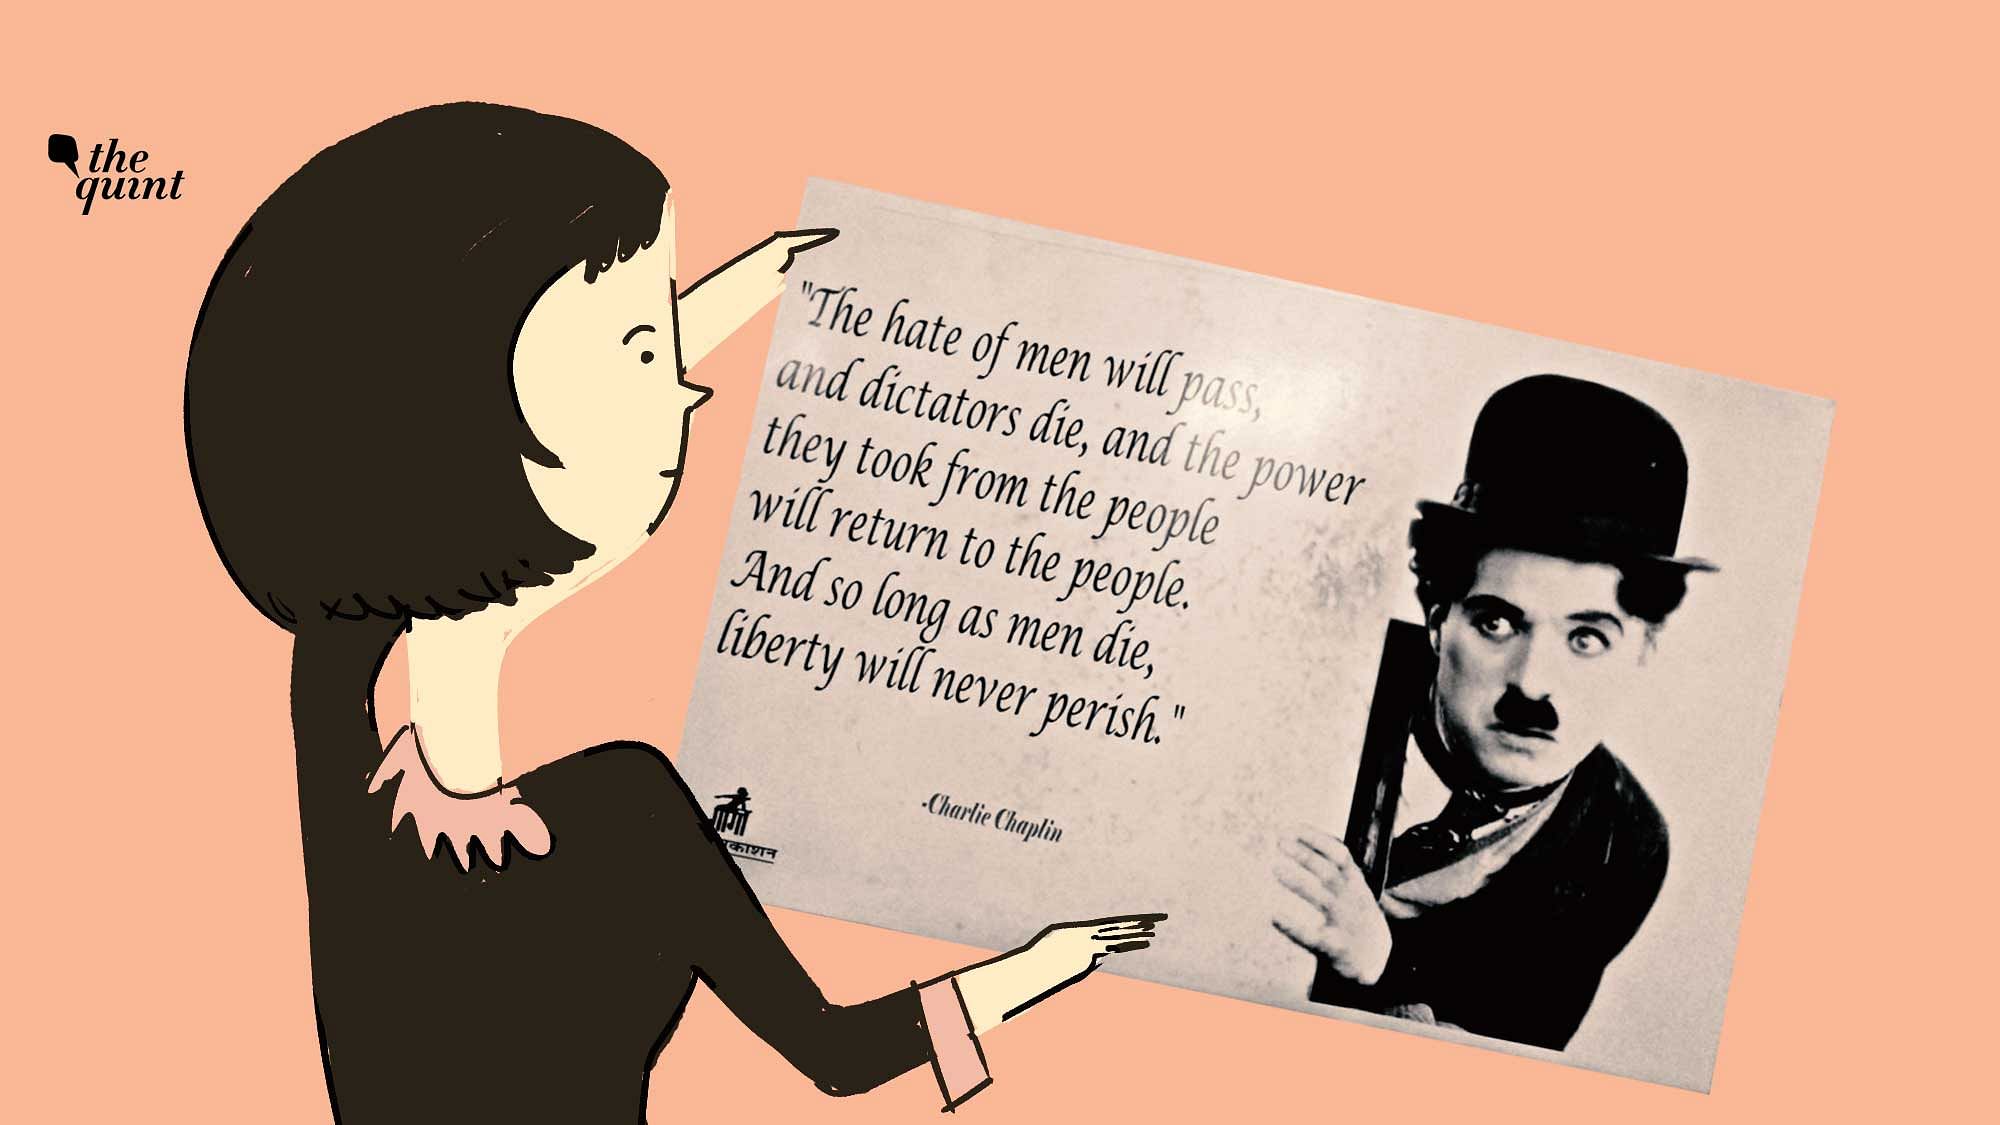 Chaplin’s quote from his speech in <i>The Great Dictator  </i>(1940). Image used for representational purposes.